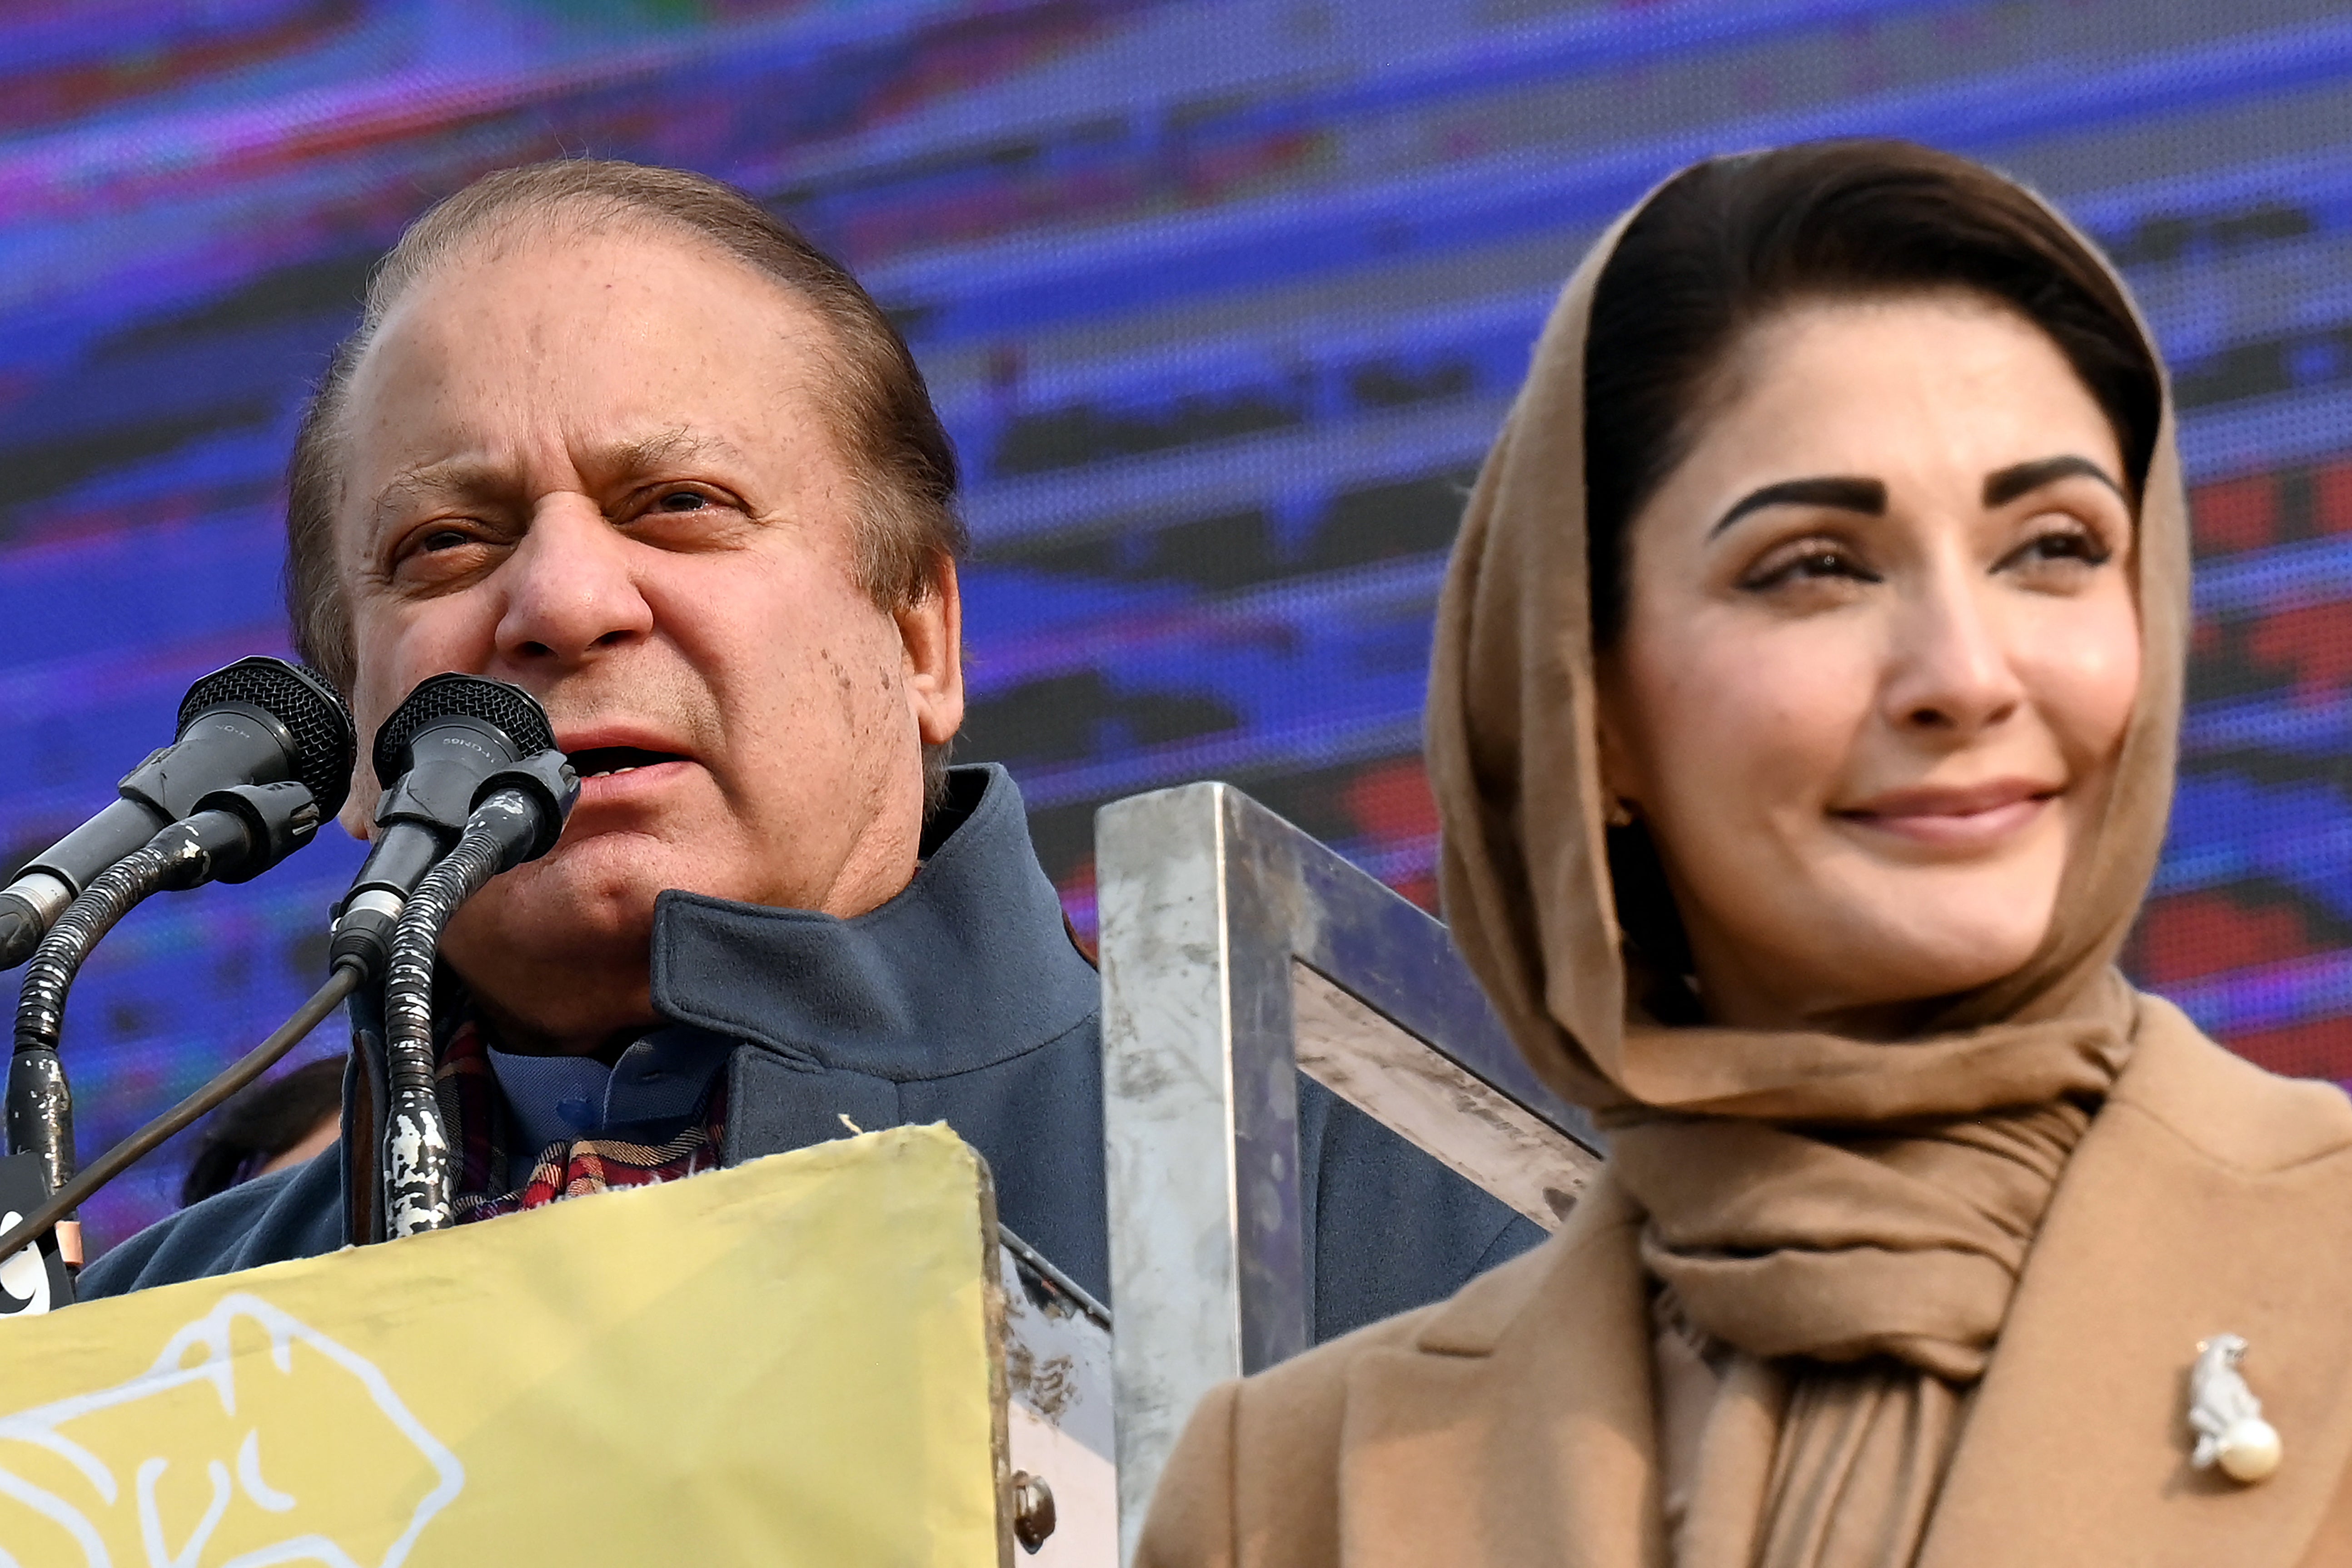 PML-N leader Nawaz Sharif addresses the rally in Mansehra with his daughter, Maryam